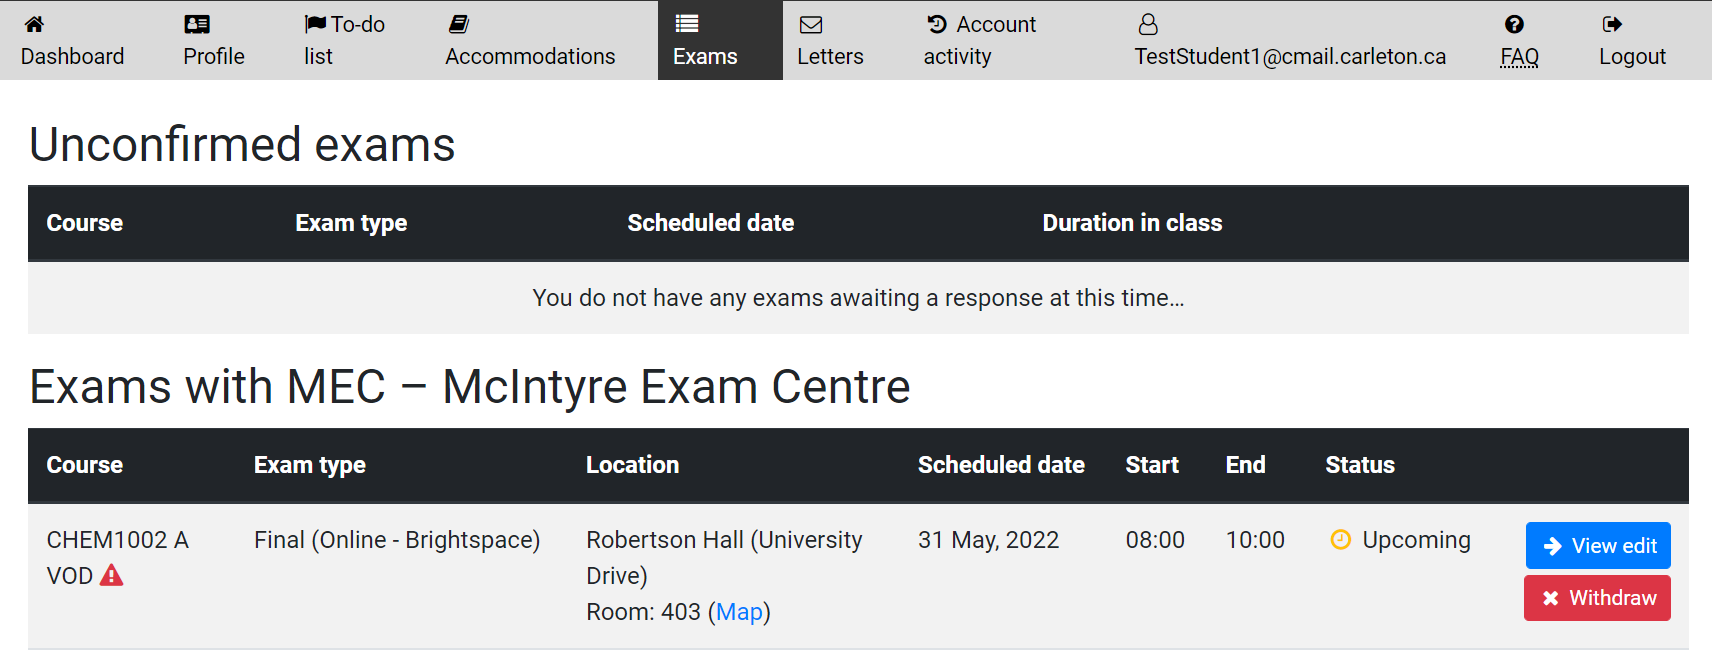 Screenshot of the student portal Exams tab, showing the student's exams categorized by "Unconfirmed Exams" and "Exams with MEC – McIntyre Exam Centre"